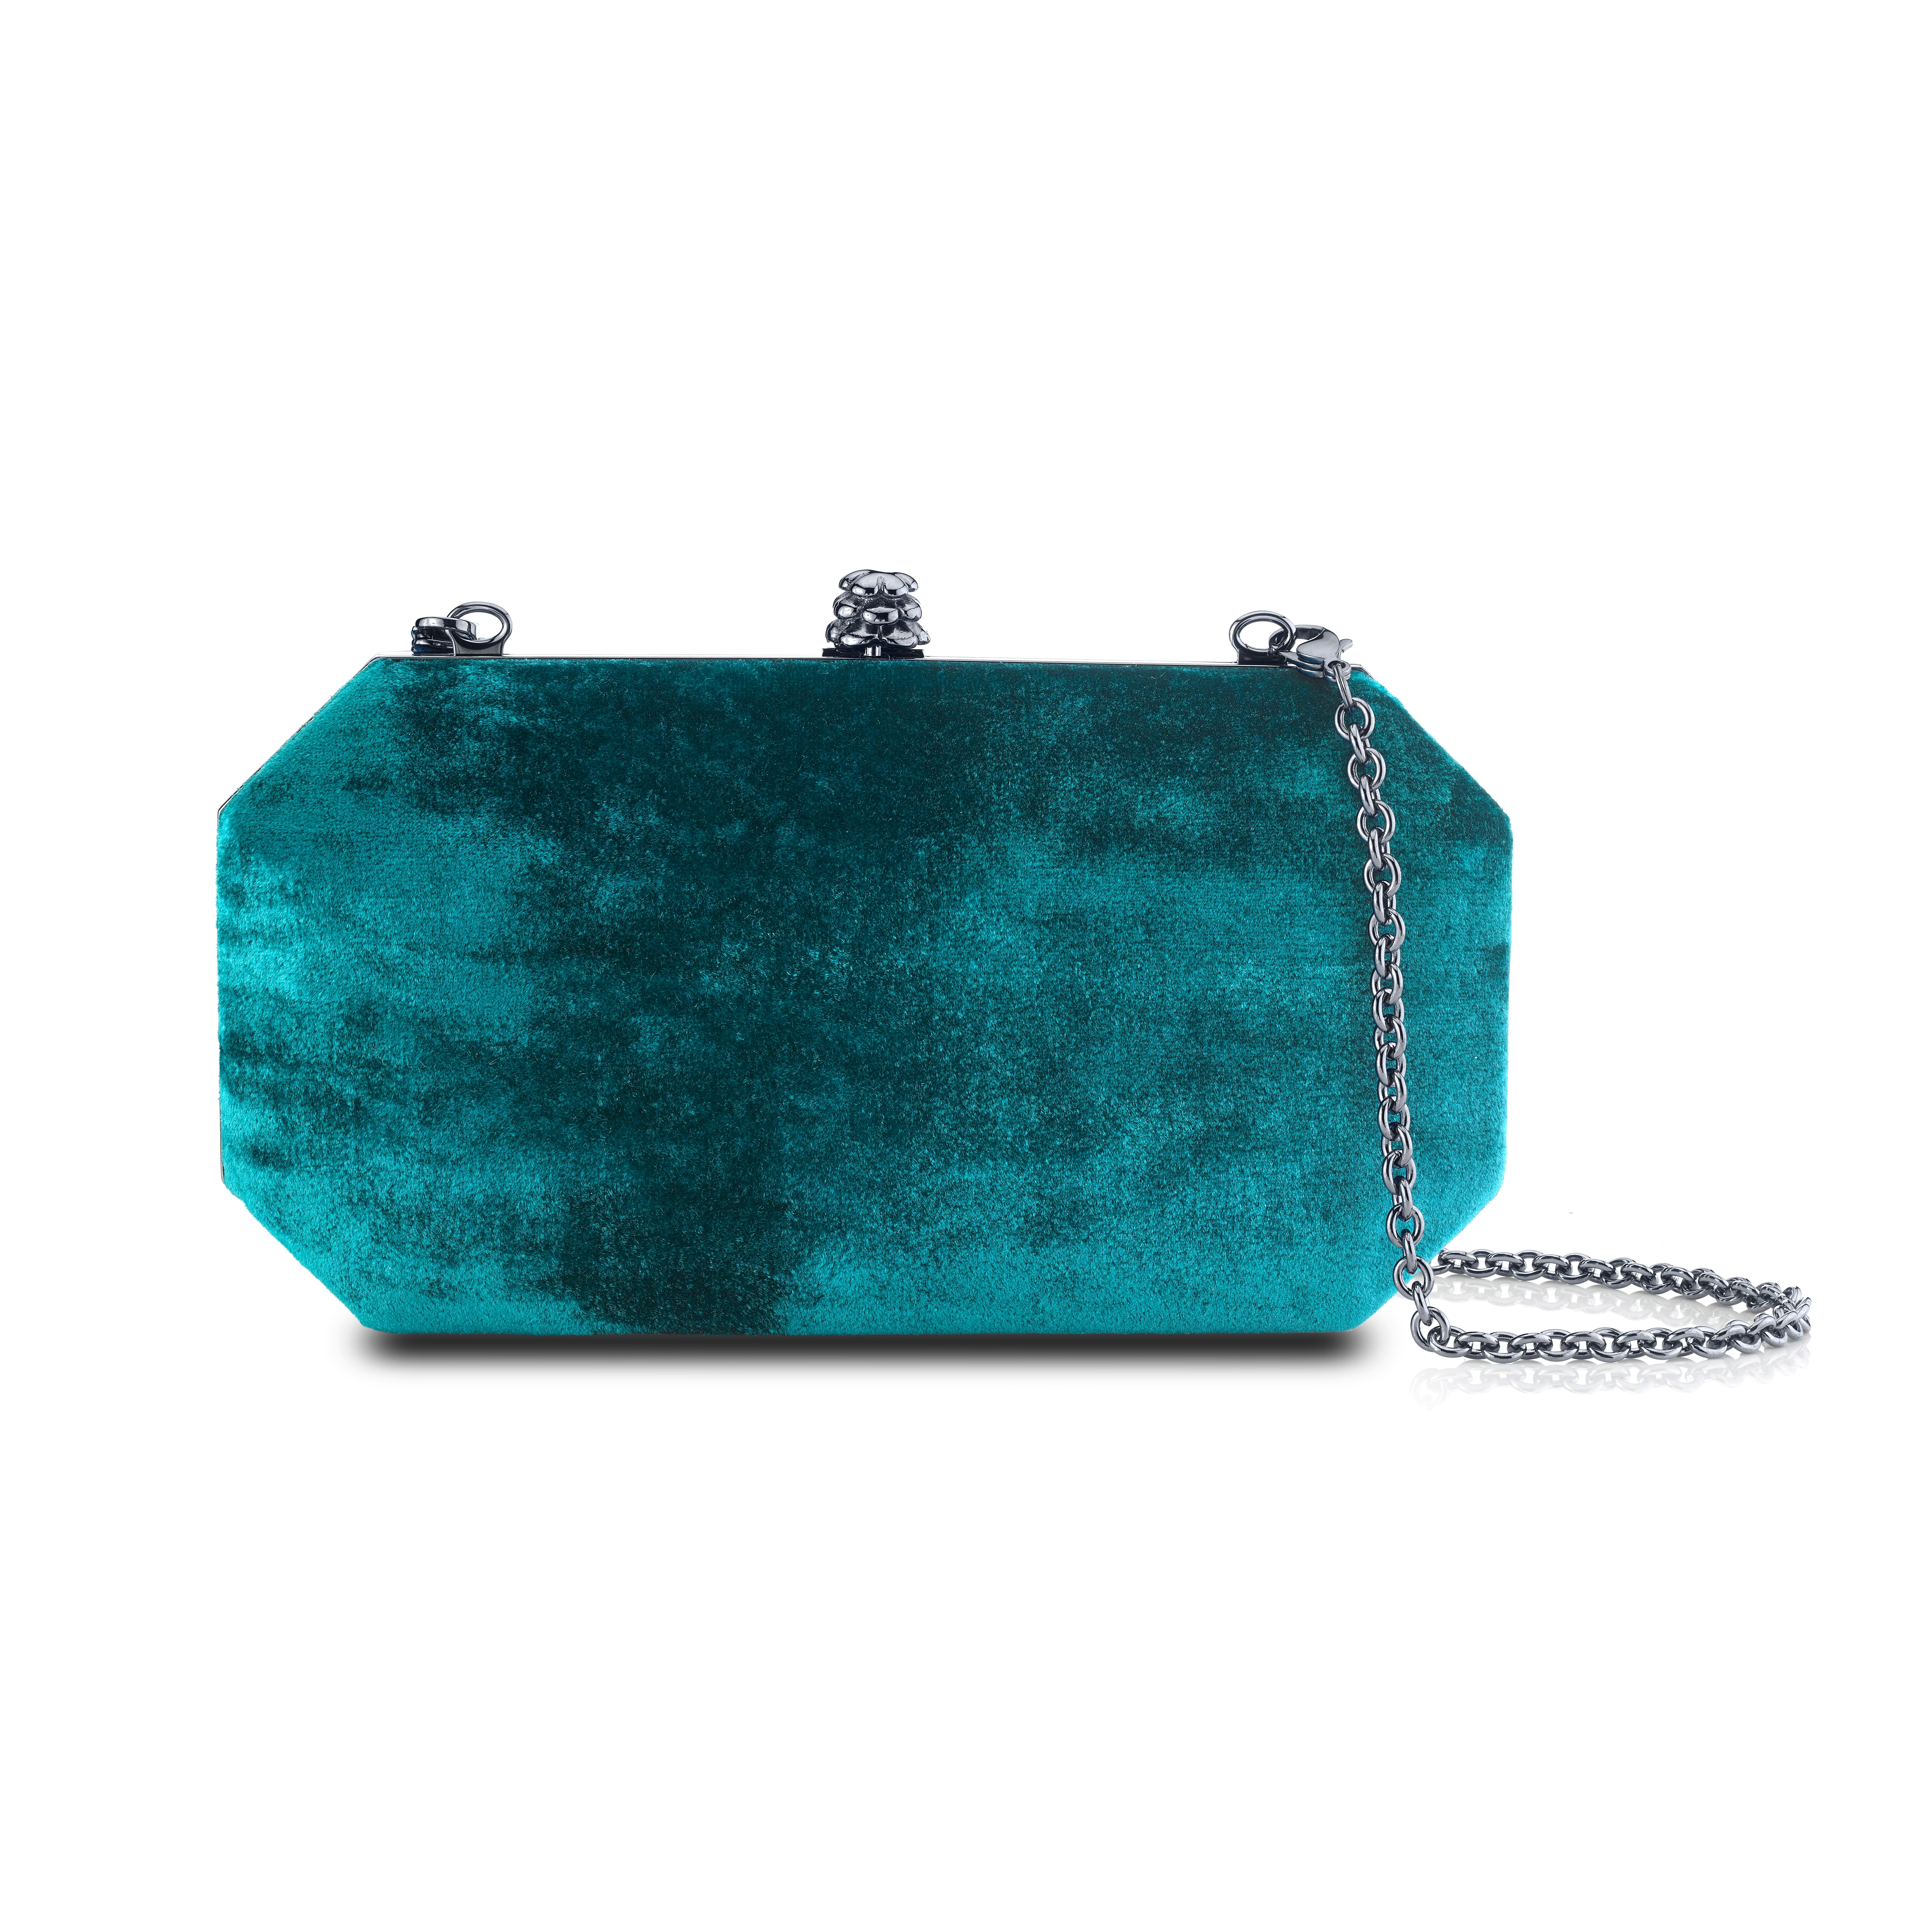 The Perry Small is featured in our Tourmaline crushed velvet with gunmetal hardware. The Perry is a hard-framed clutch designed with interior pockets and an optional gunmetal cross-body chain. It's elegant emerald shape is inspired by Tyler's own